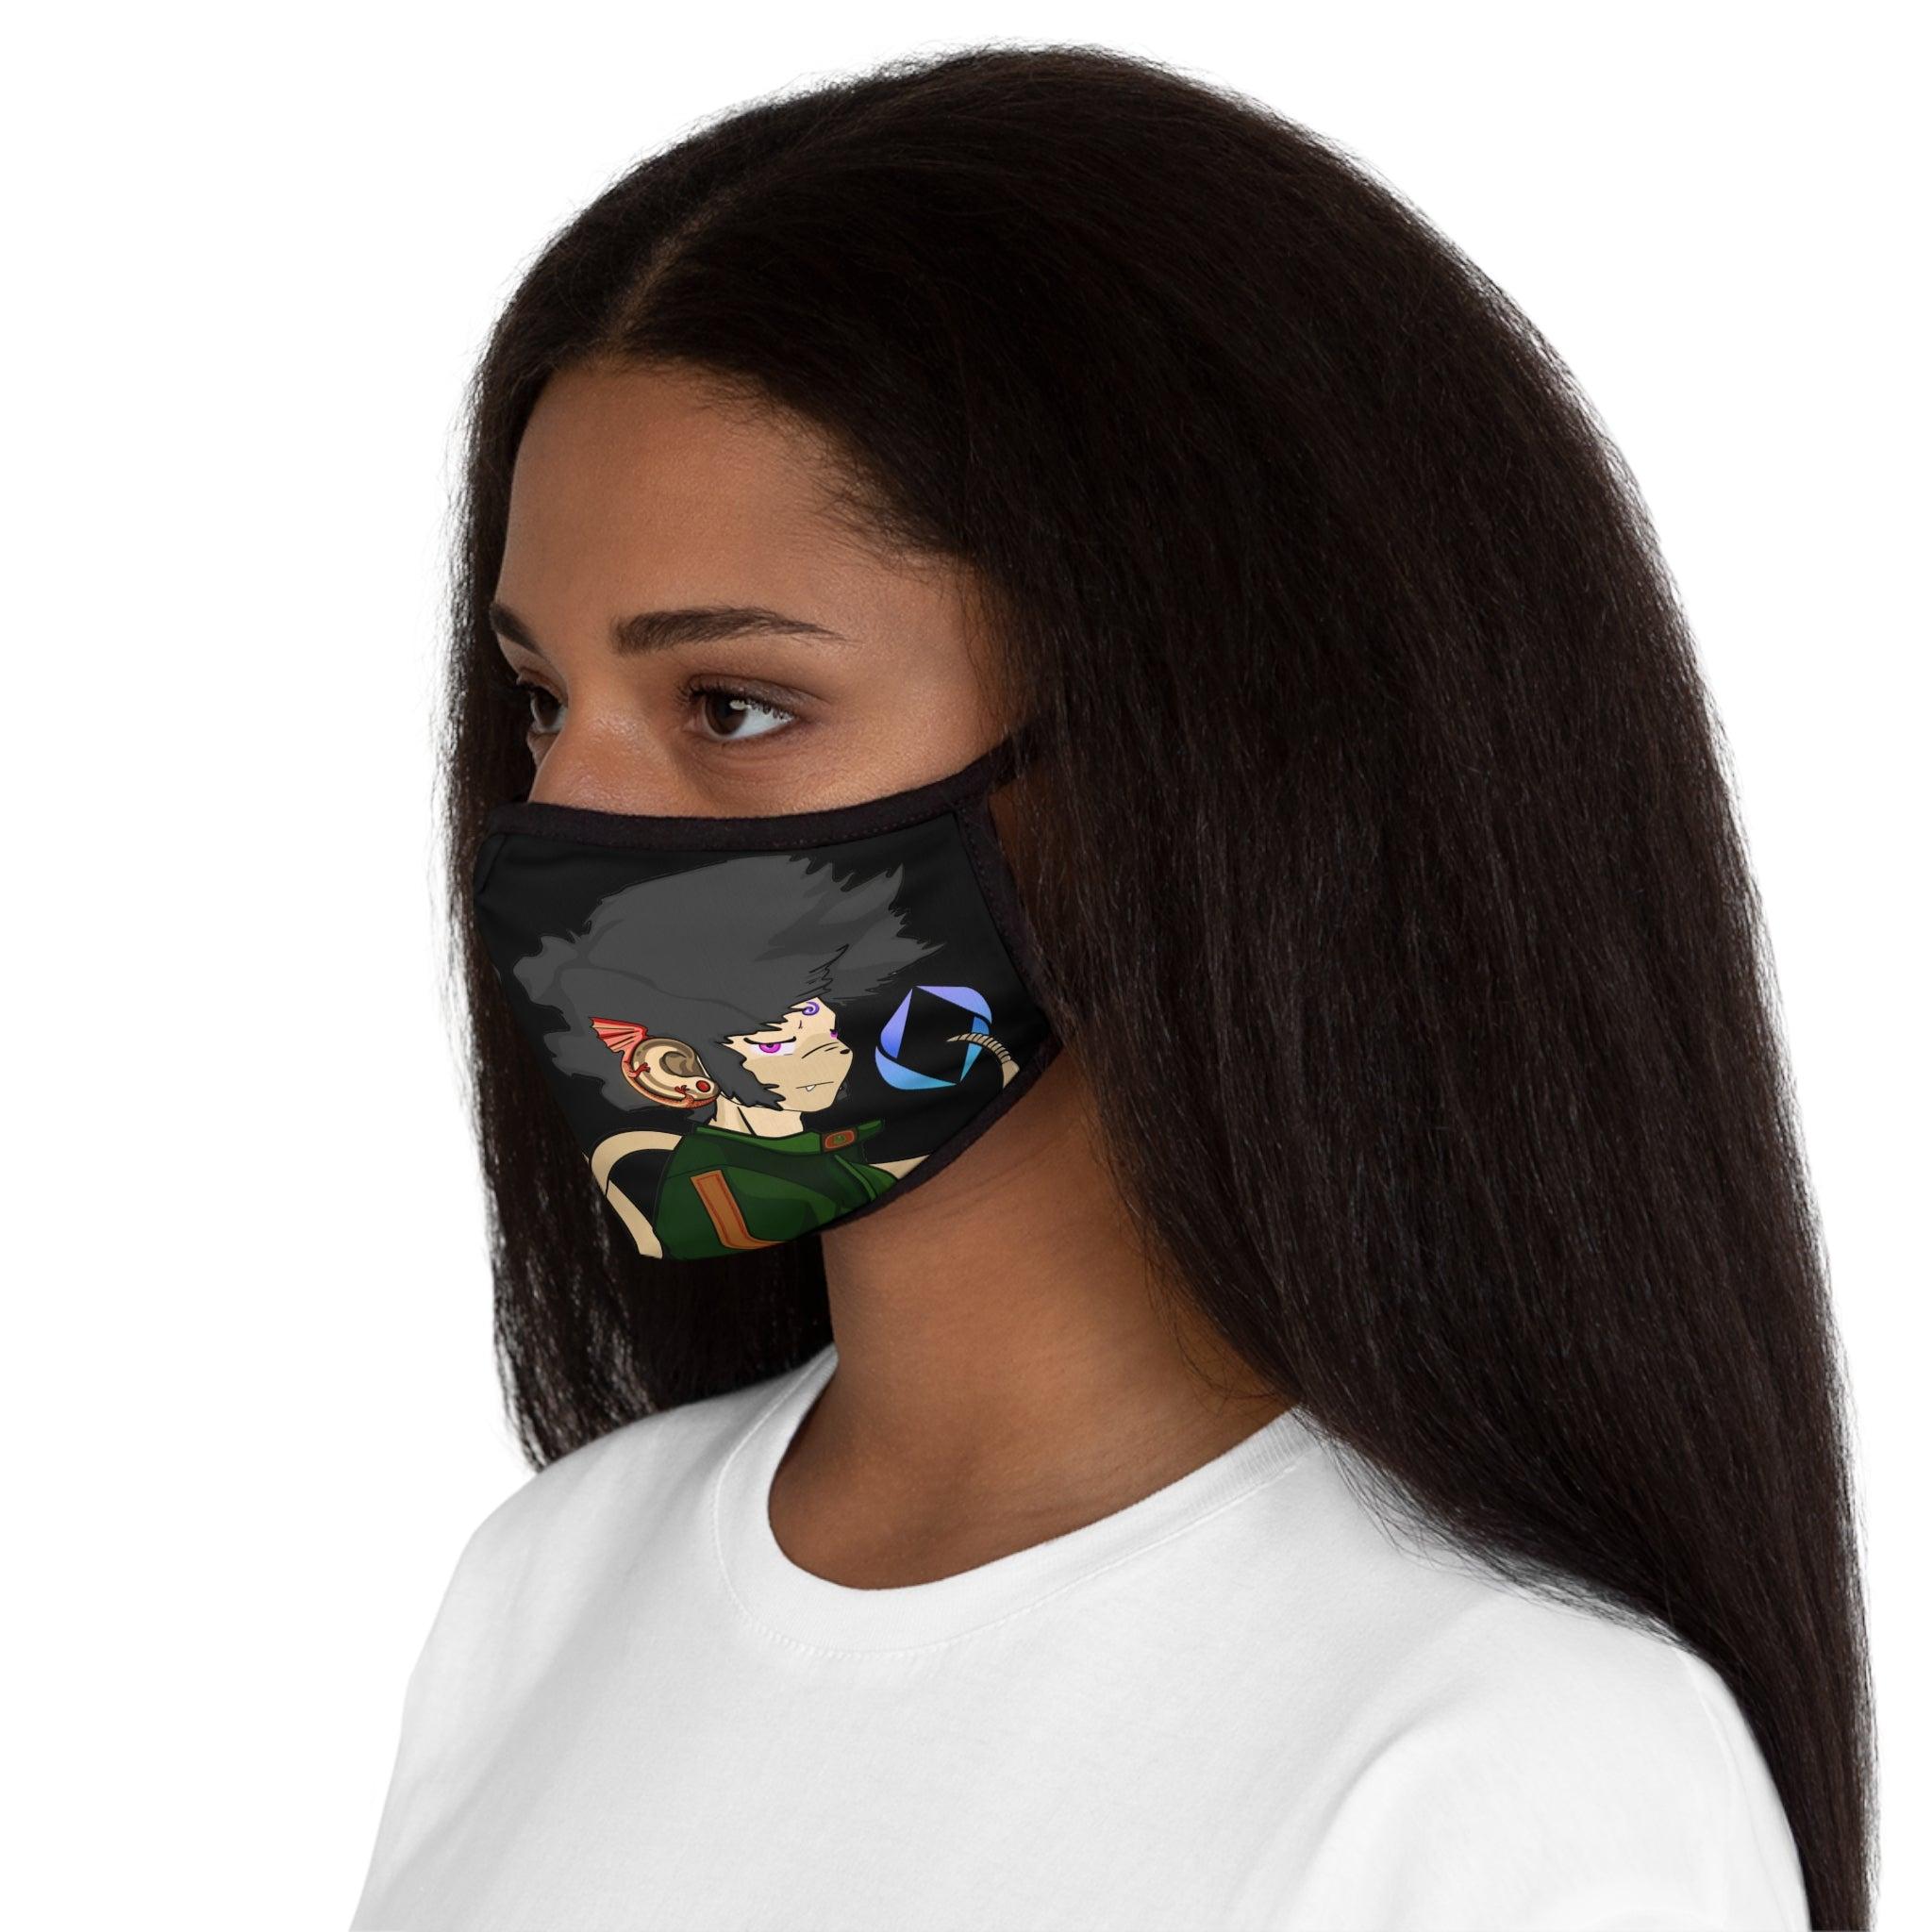 Hood Rats #275 Personalized Face Mask - 10359678622712221882_2048